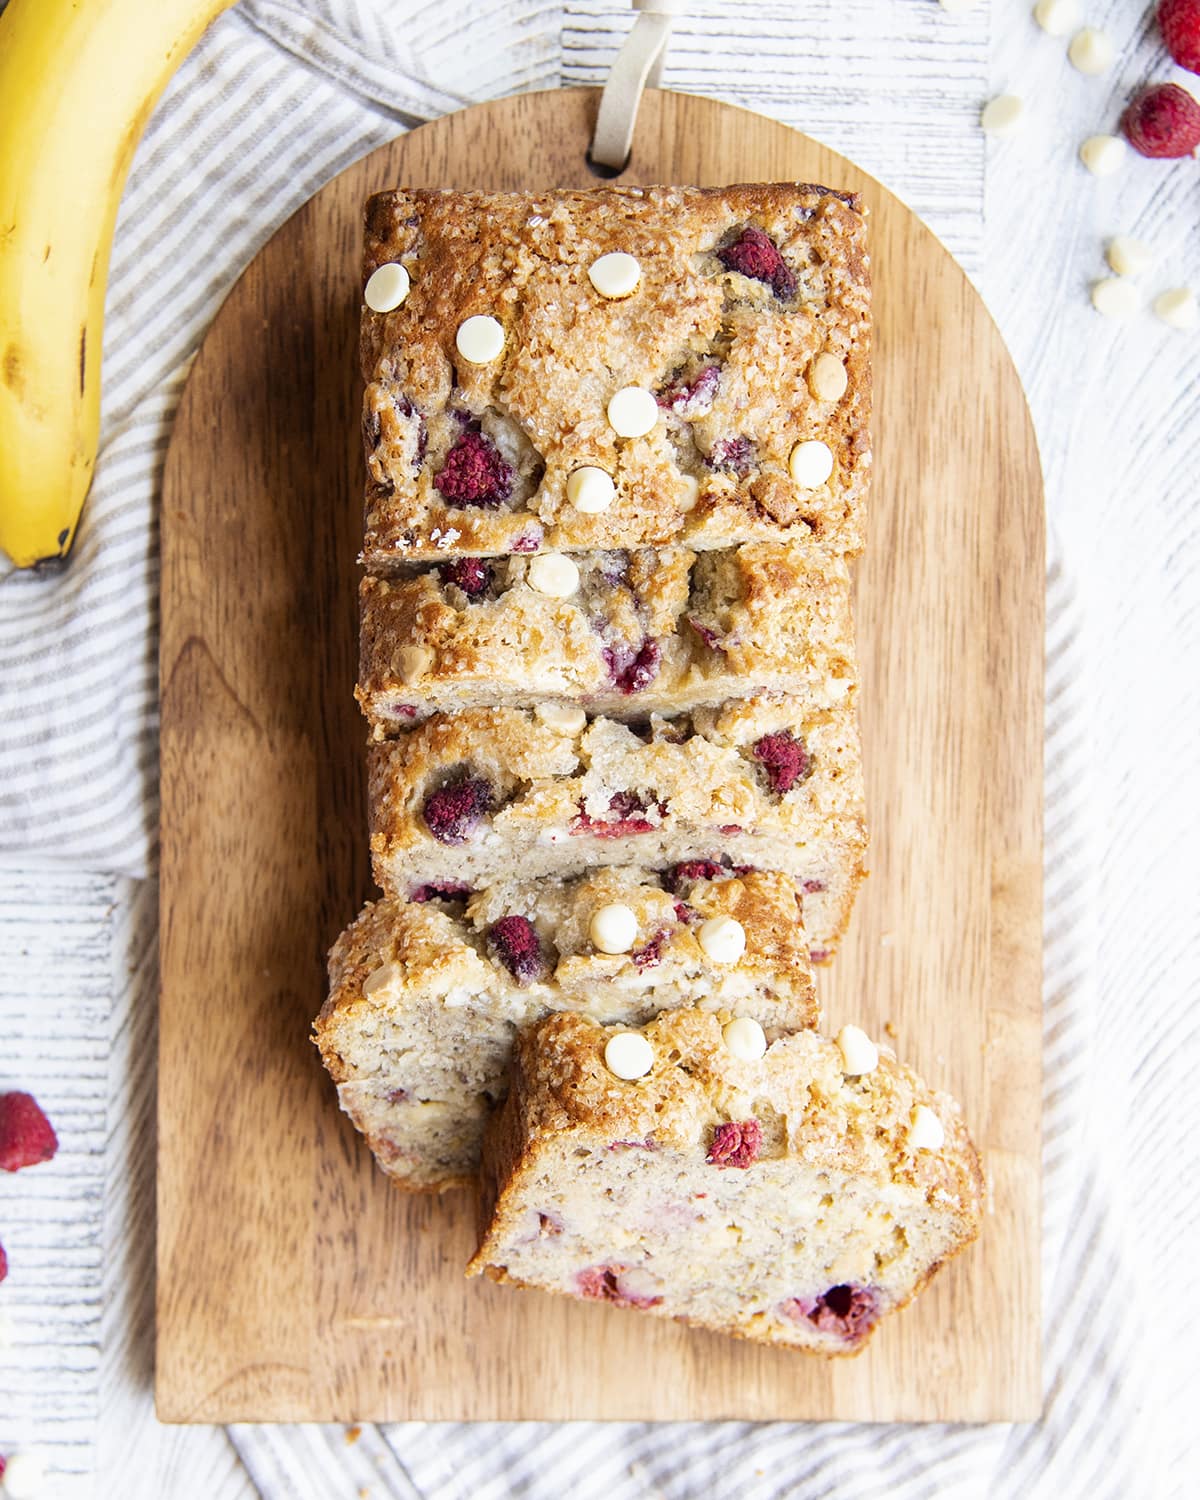 Cut up slices of banana bread with white chocolate and raspberries on a cutting board.